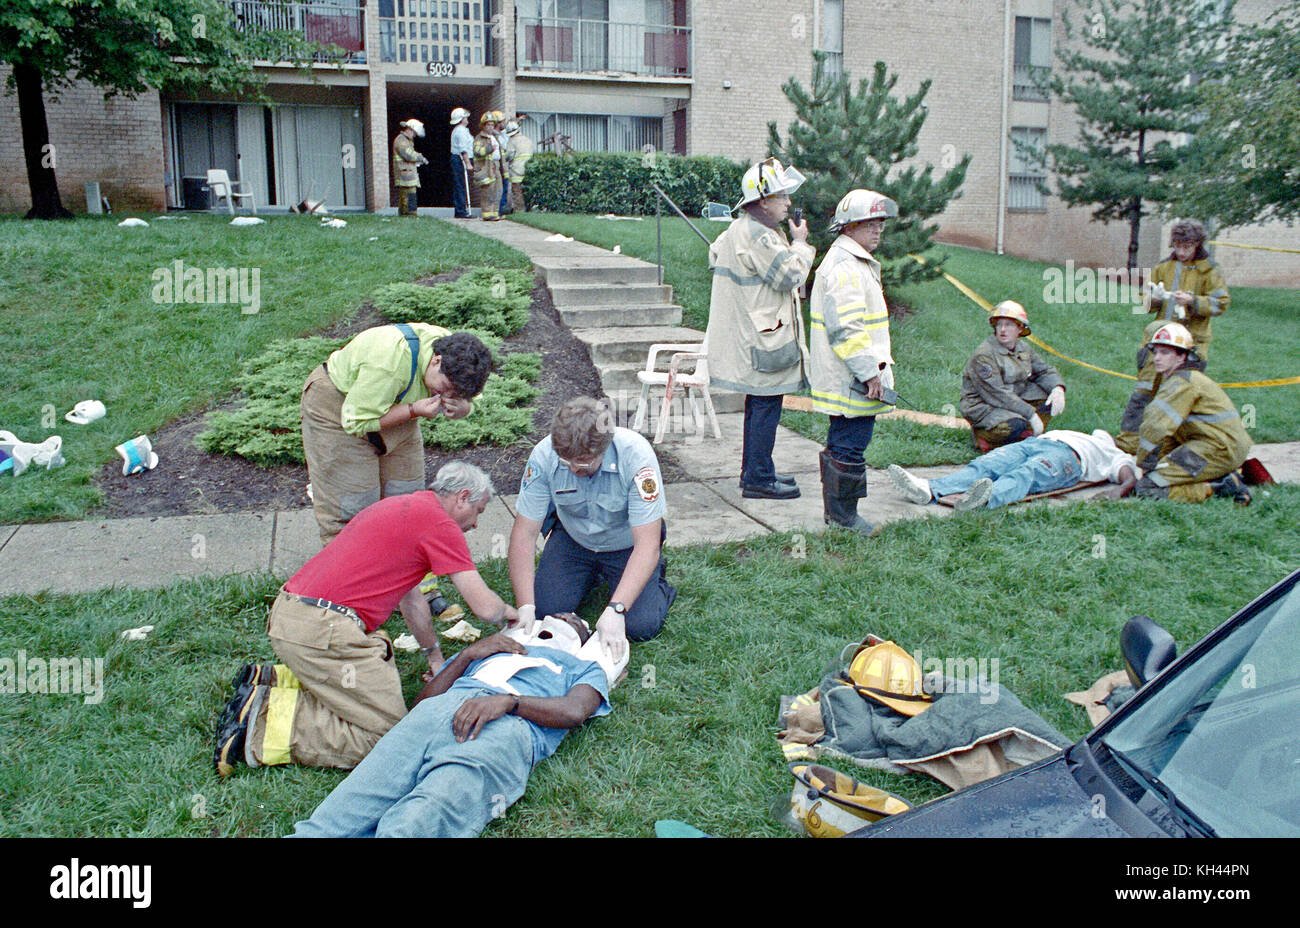 Fire and medical personnel work on people injured when their apartment balcony collapse in Bladensburg, Maryland Stock Photo